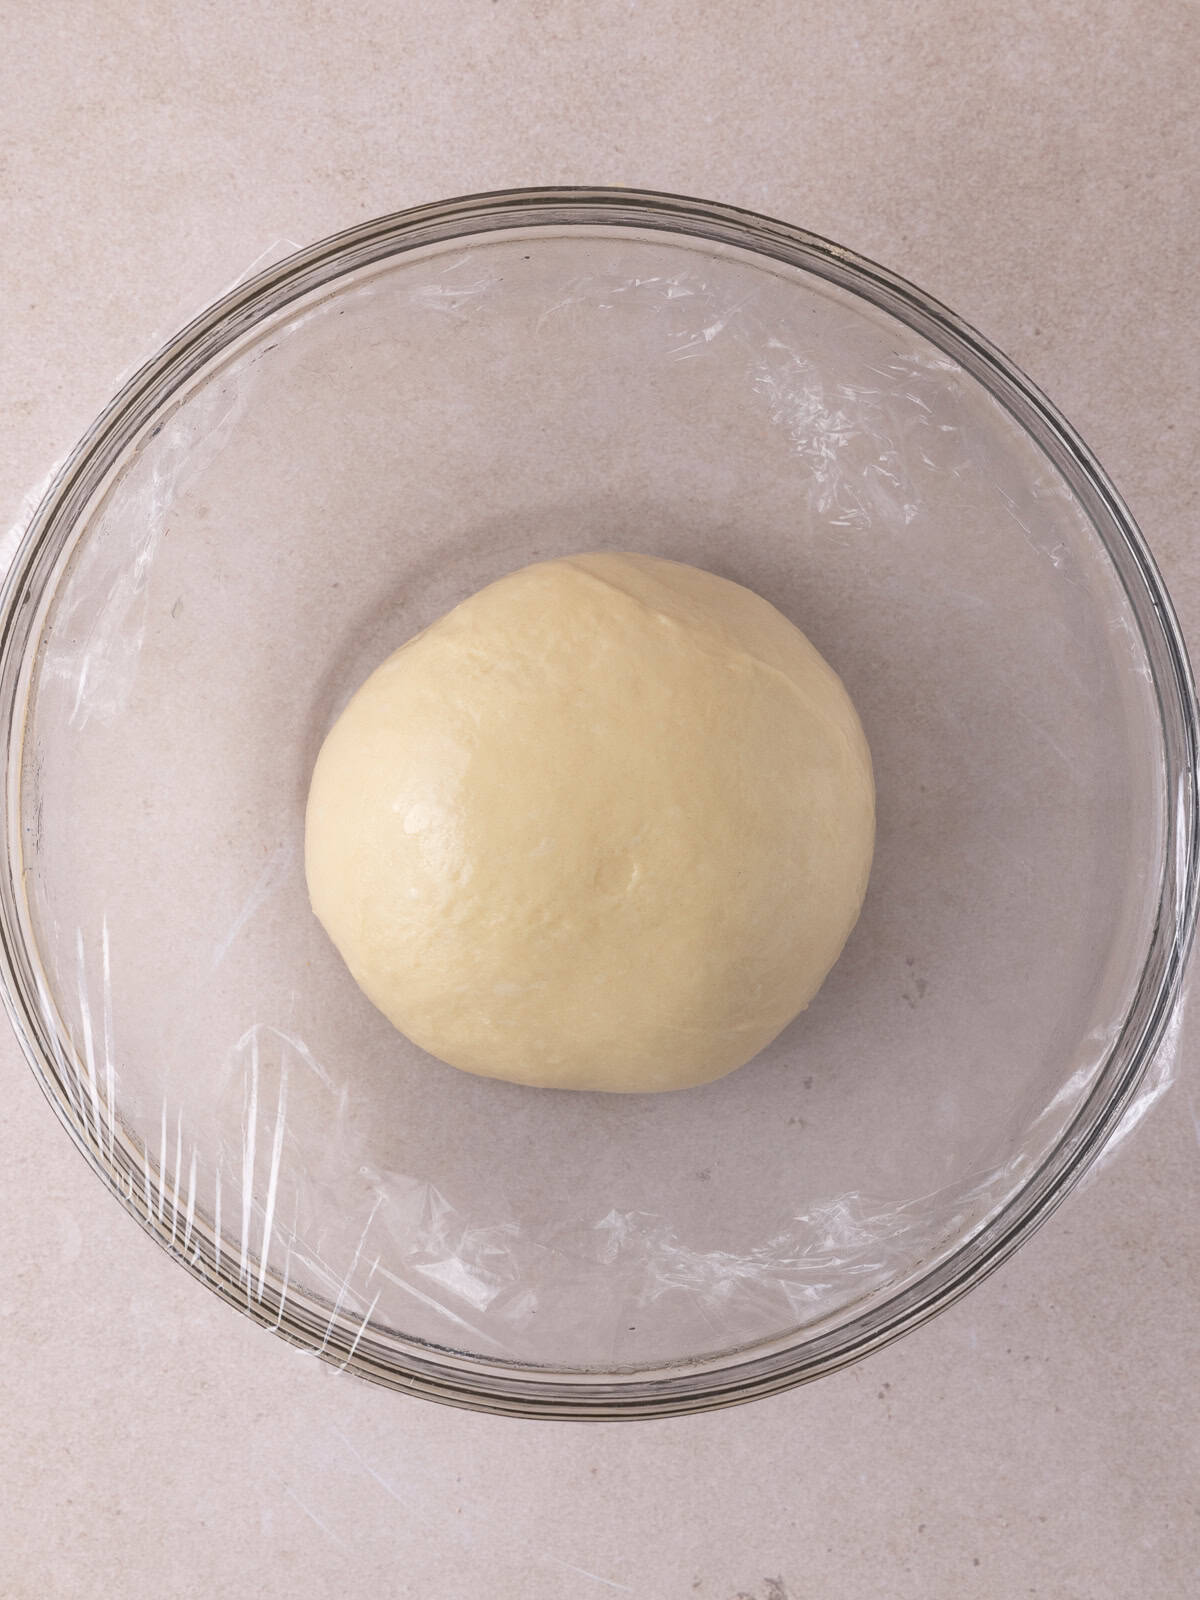 Ball of dough in glass bowl before rise.